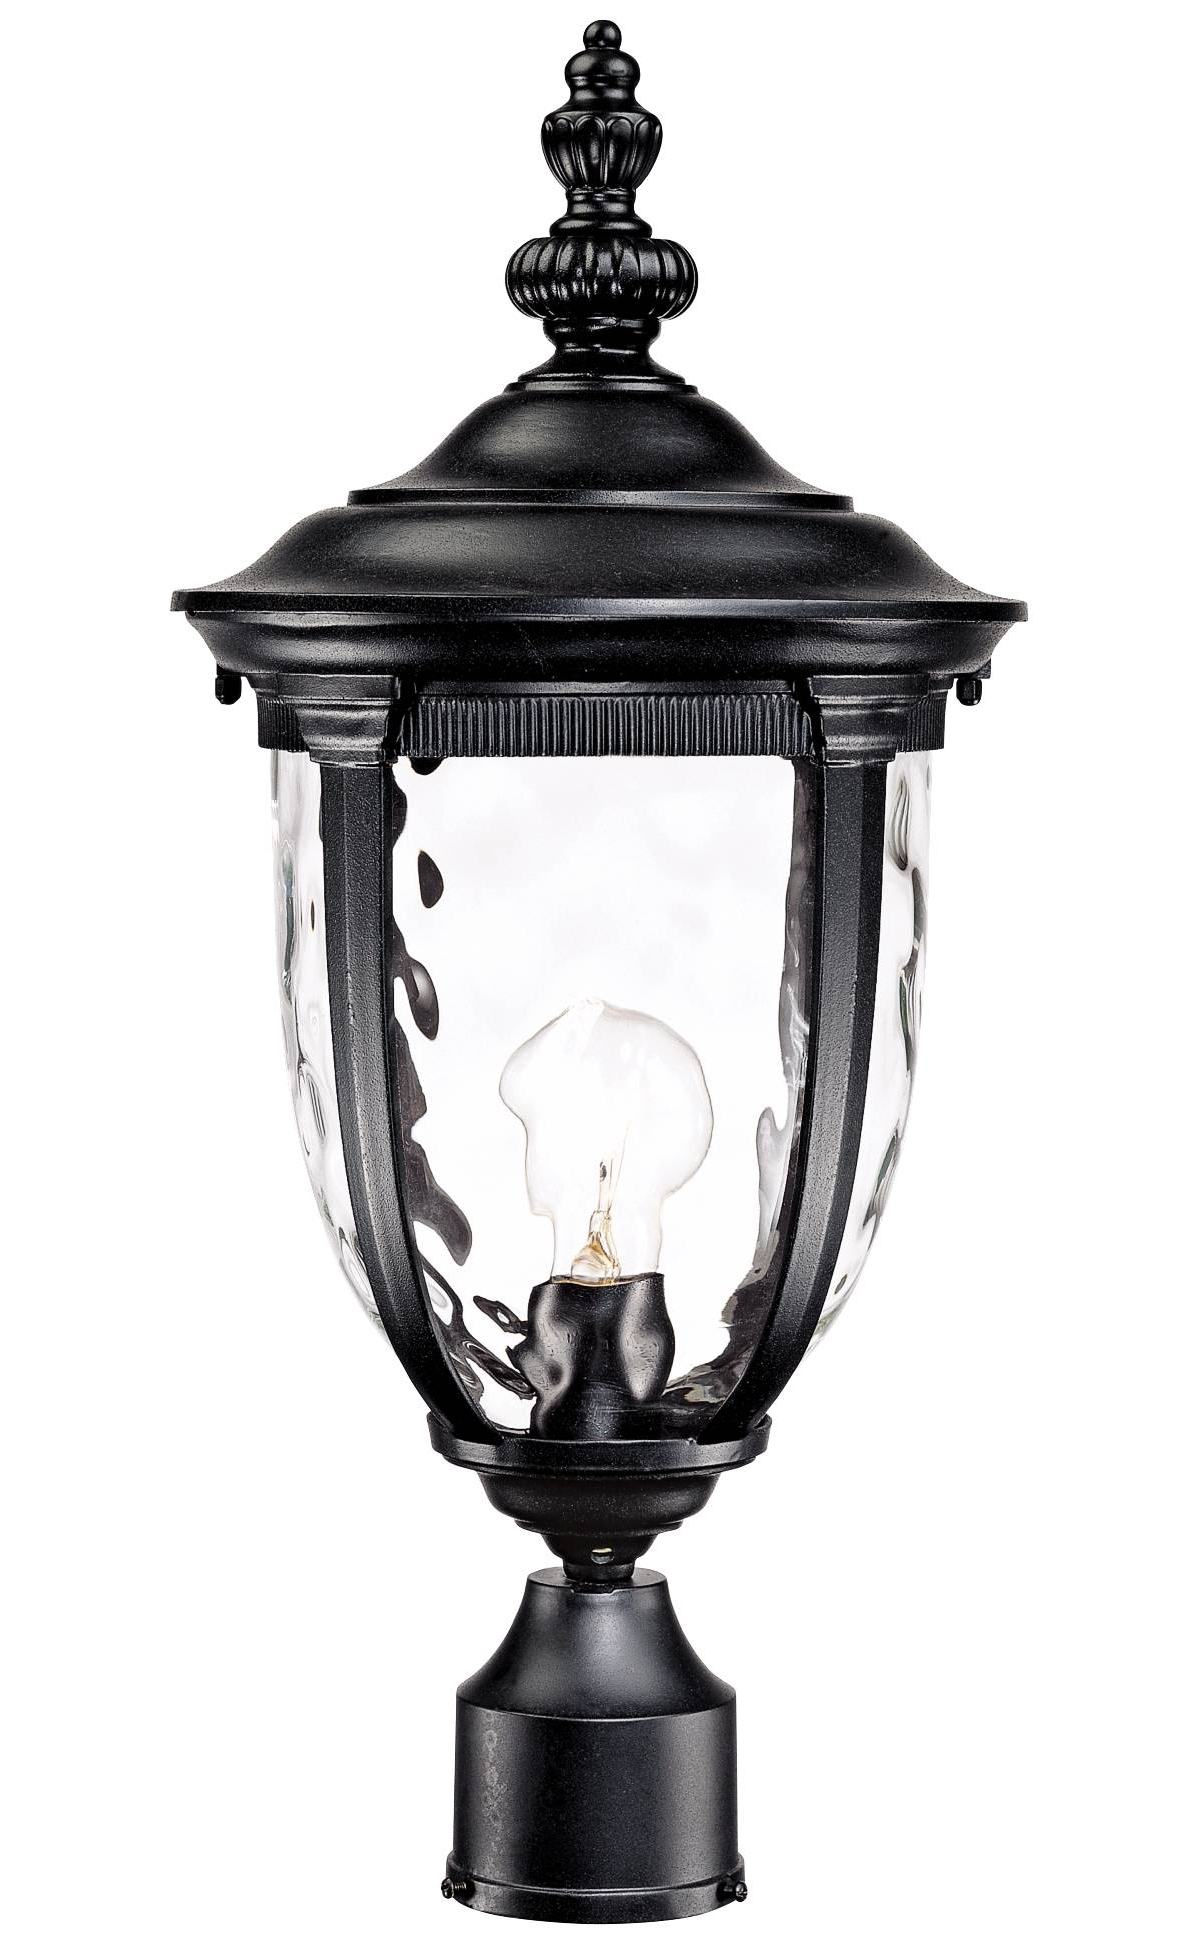 Bellagio 21 1/4" High Country Traditional Outdoor Post Light Fixture Pole Porch House Exterior Lantern Weatherproof Texturized Black Finish Metal Clea